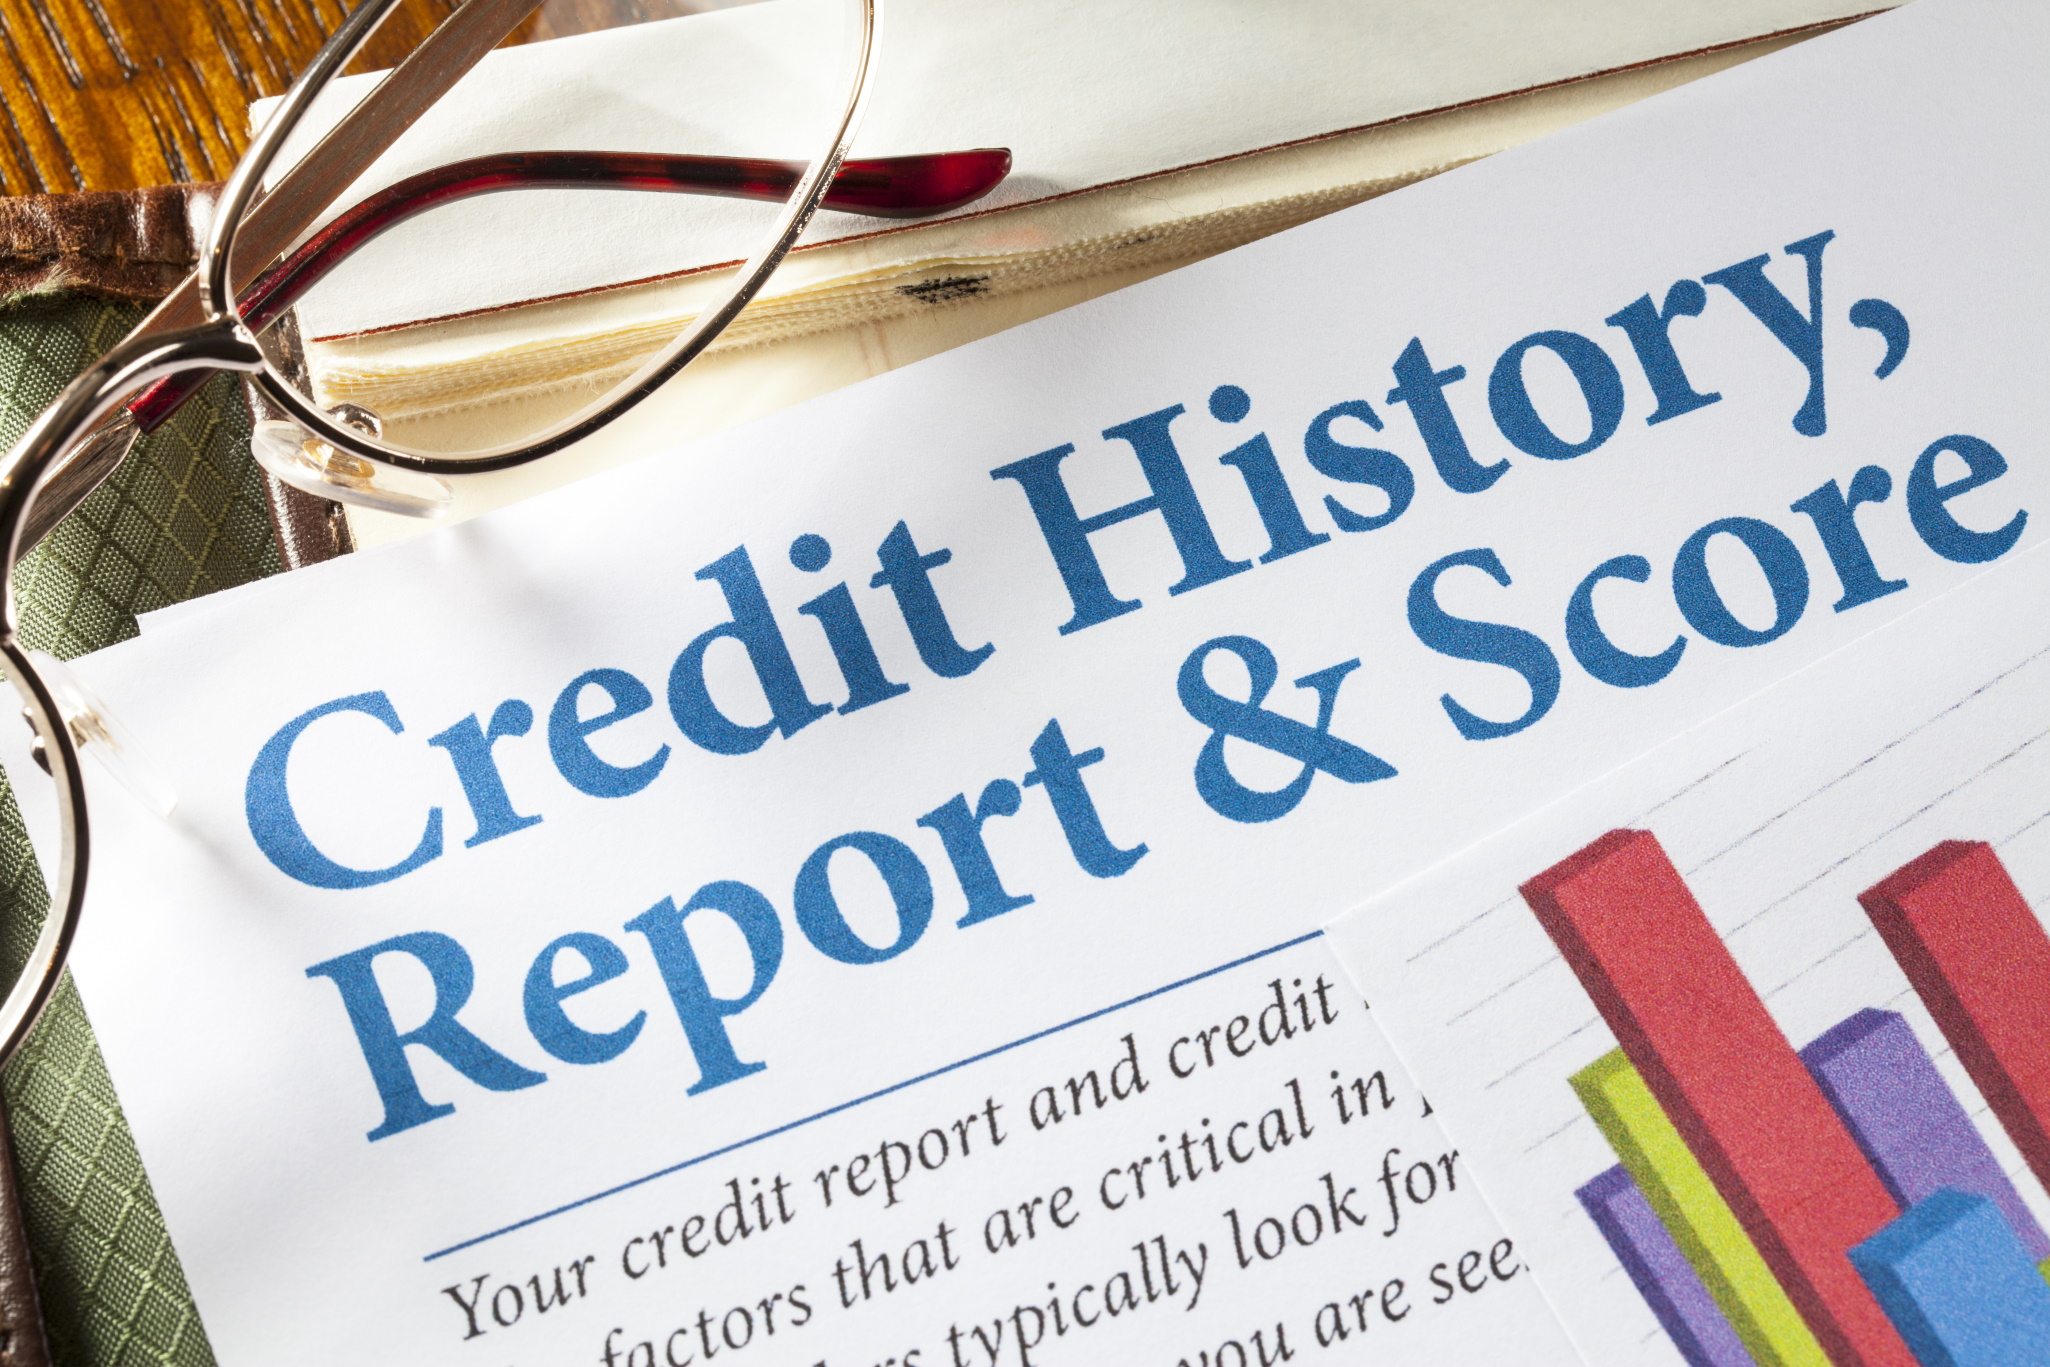 Managing your credit score page. Track Your Credit History. Keeping Track of Your Credit History and Credit Score